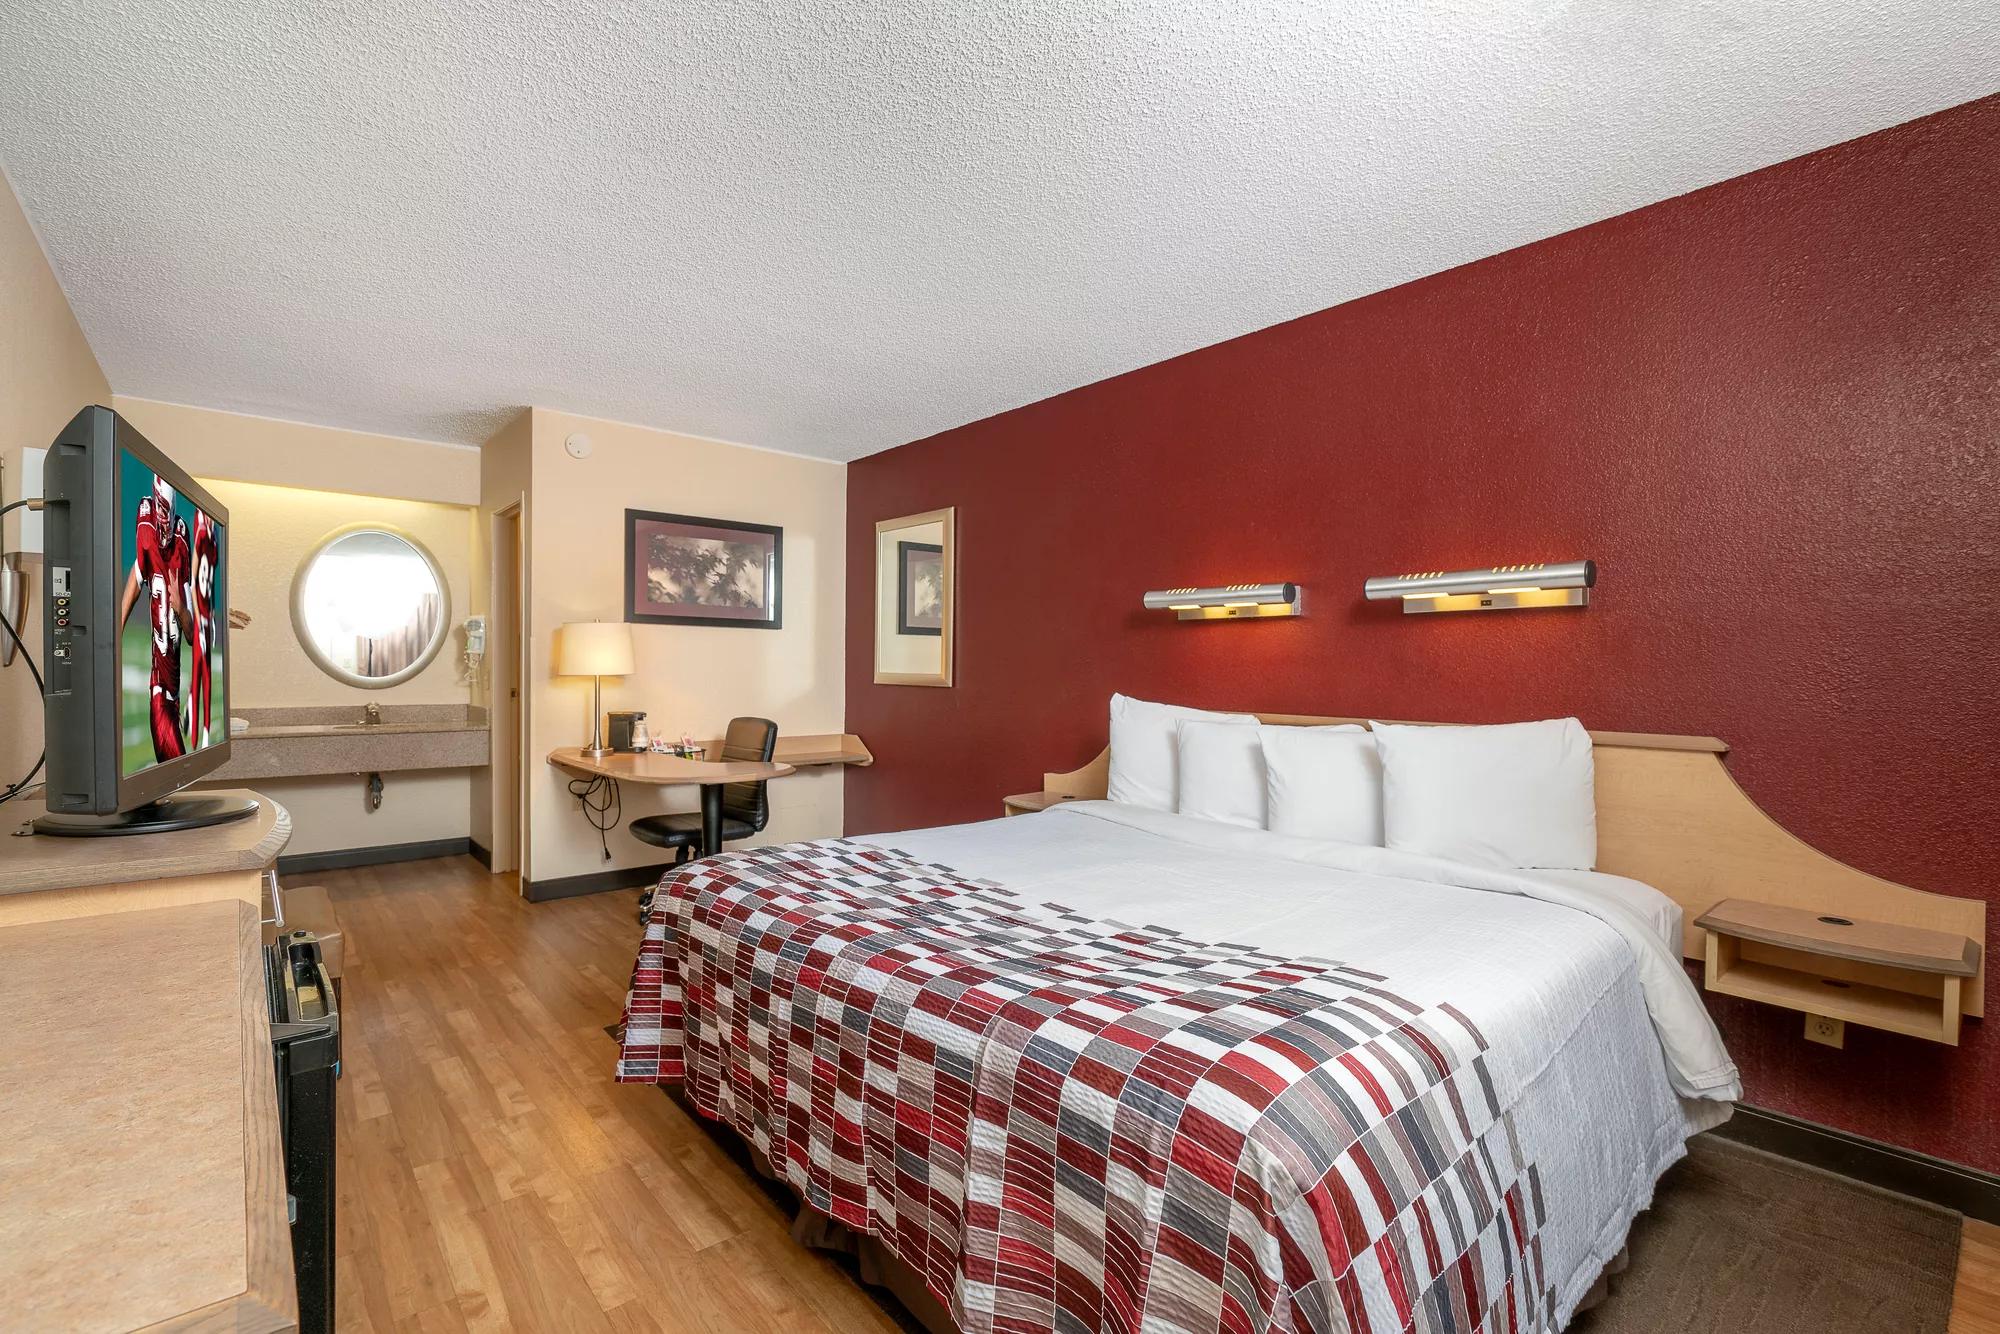 Red Roof Inn Syracuse Single King Bed Room Image Details